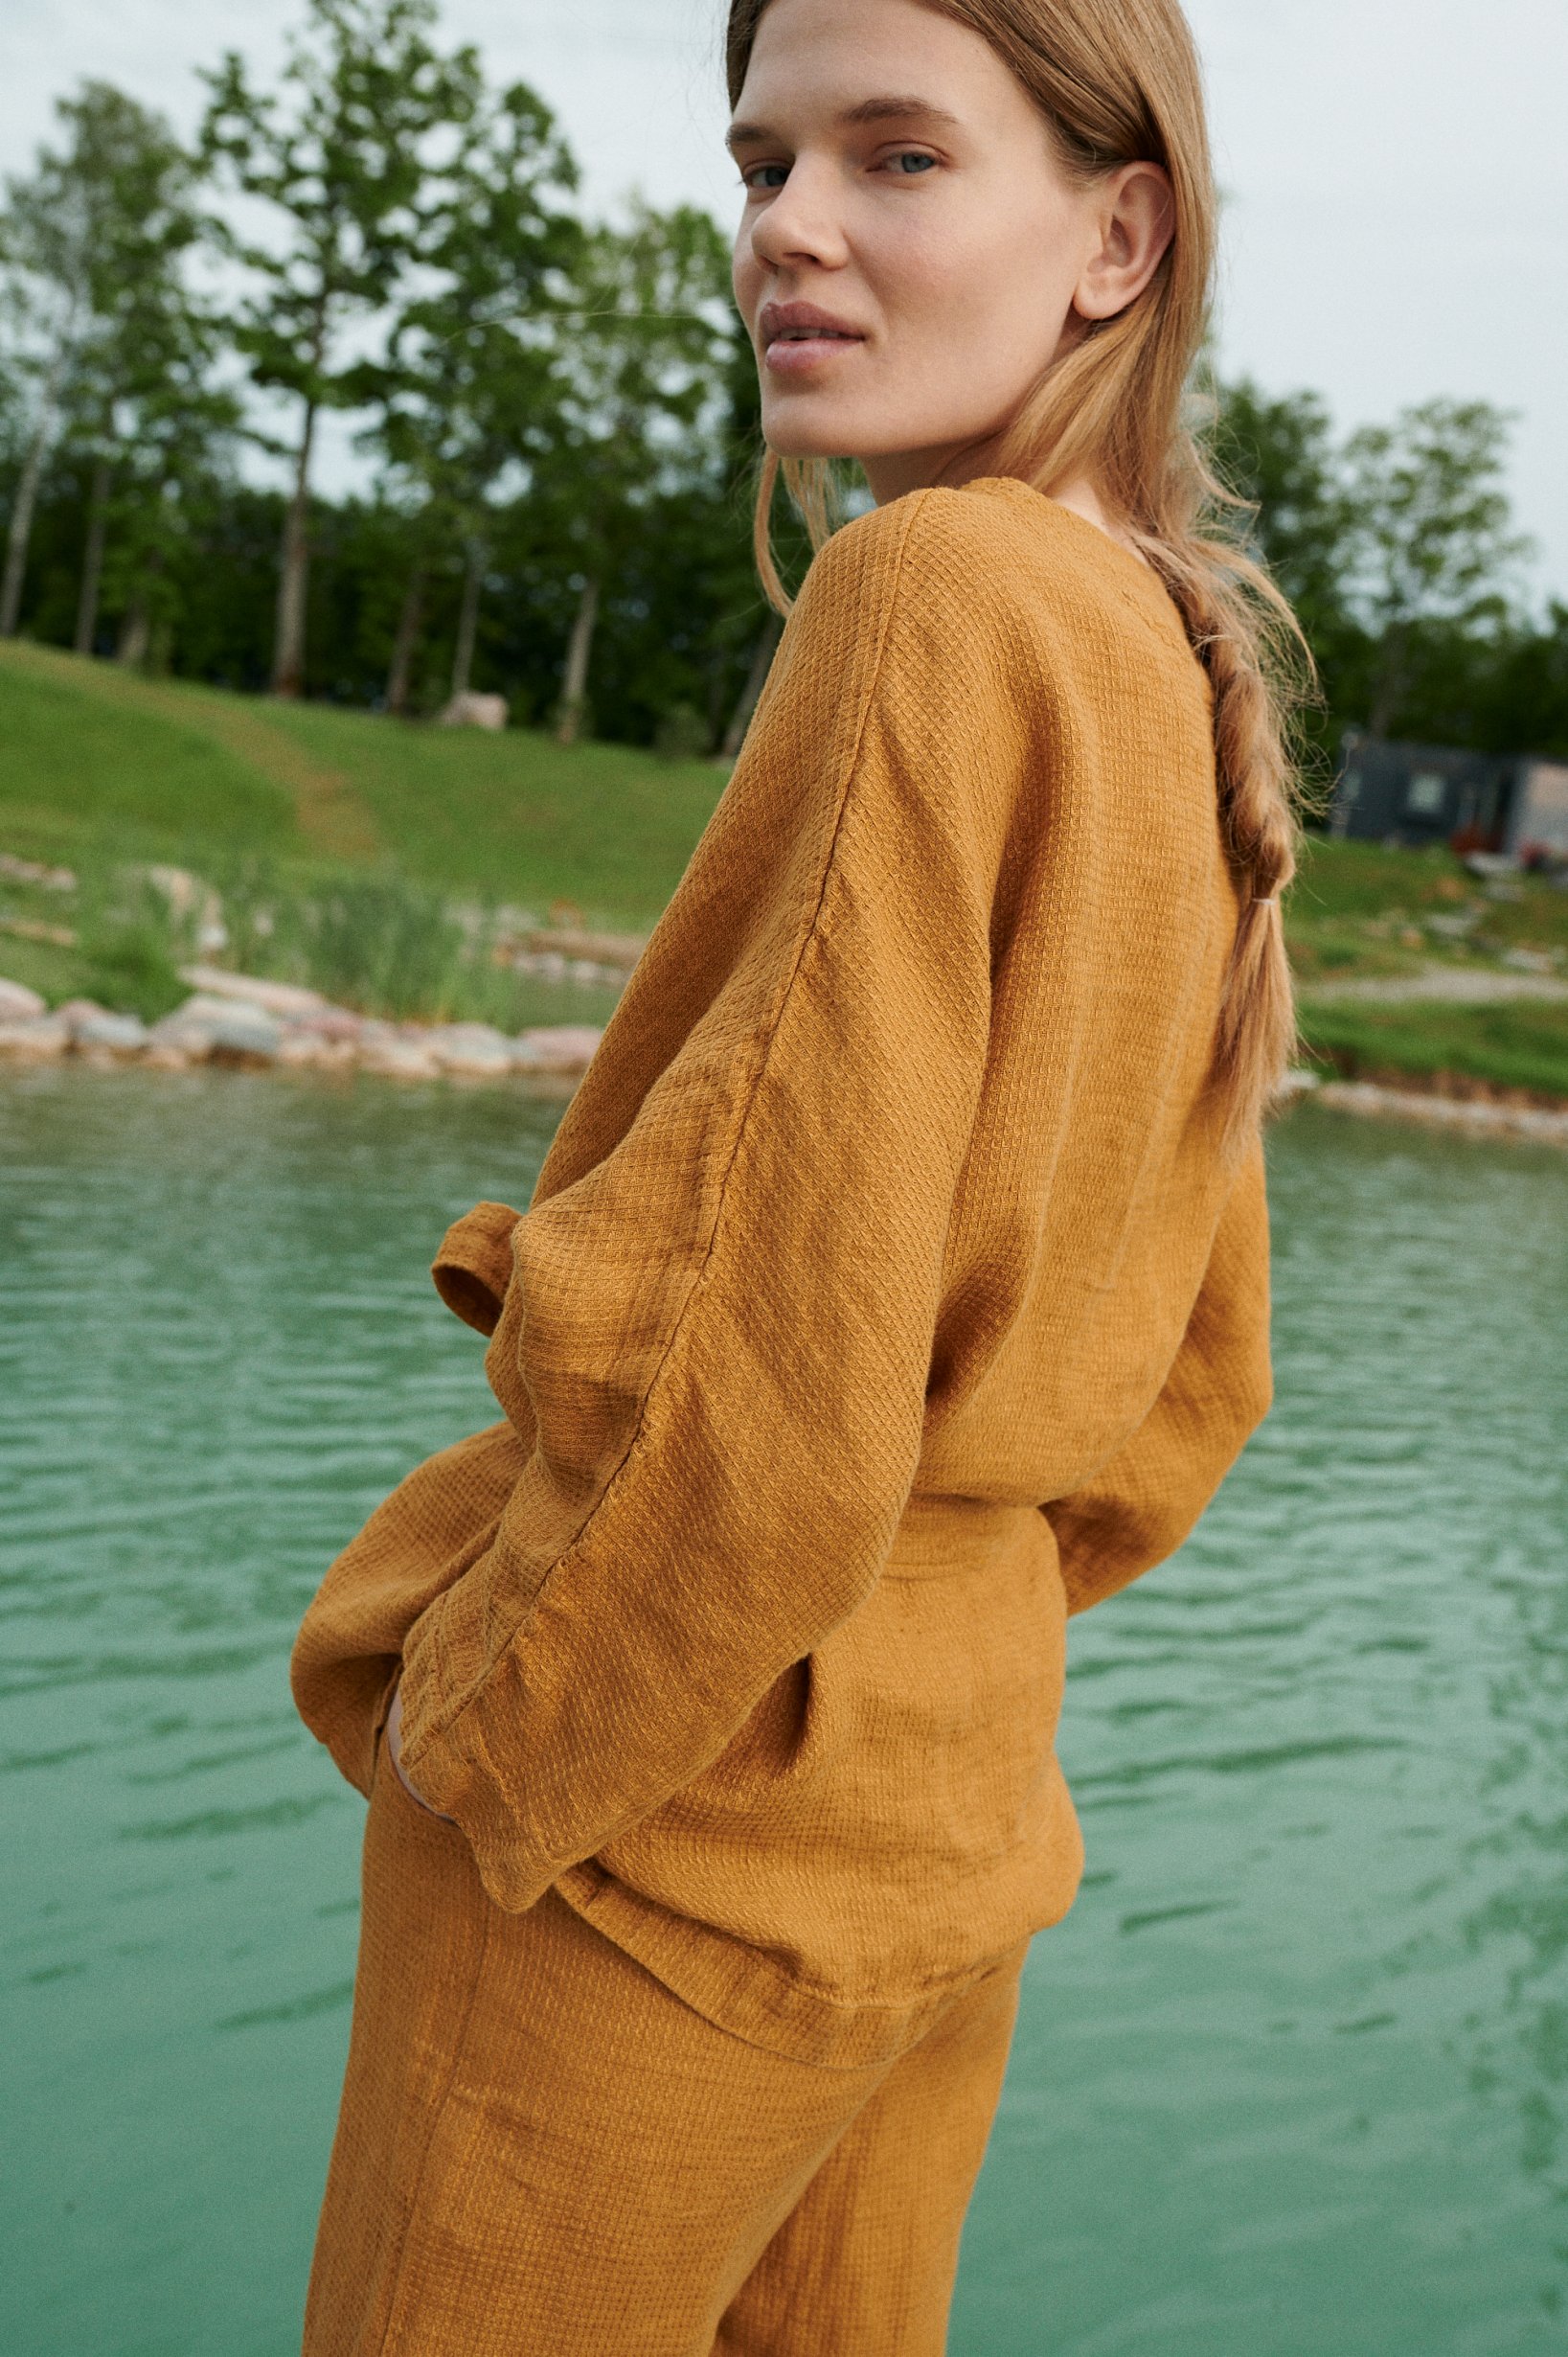 A waffle-like textured linen jacket with wide sleeves and a belt